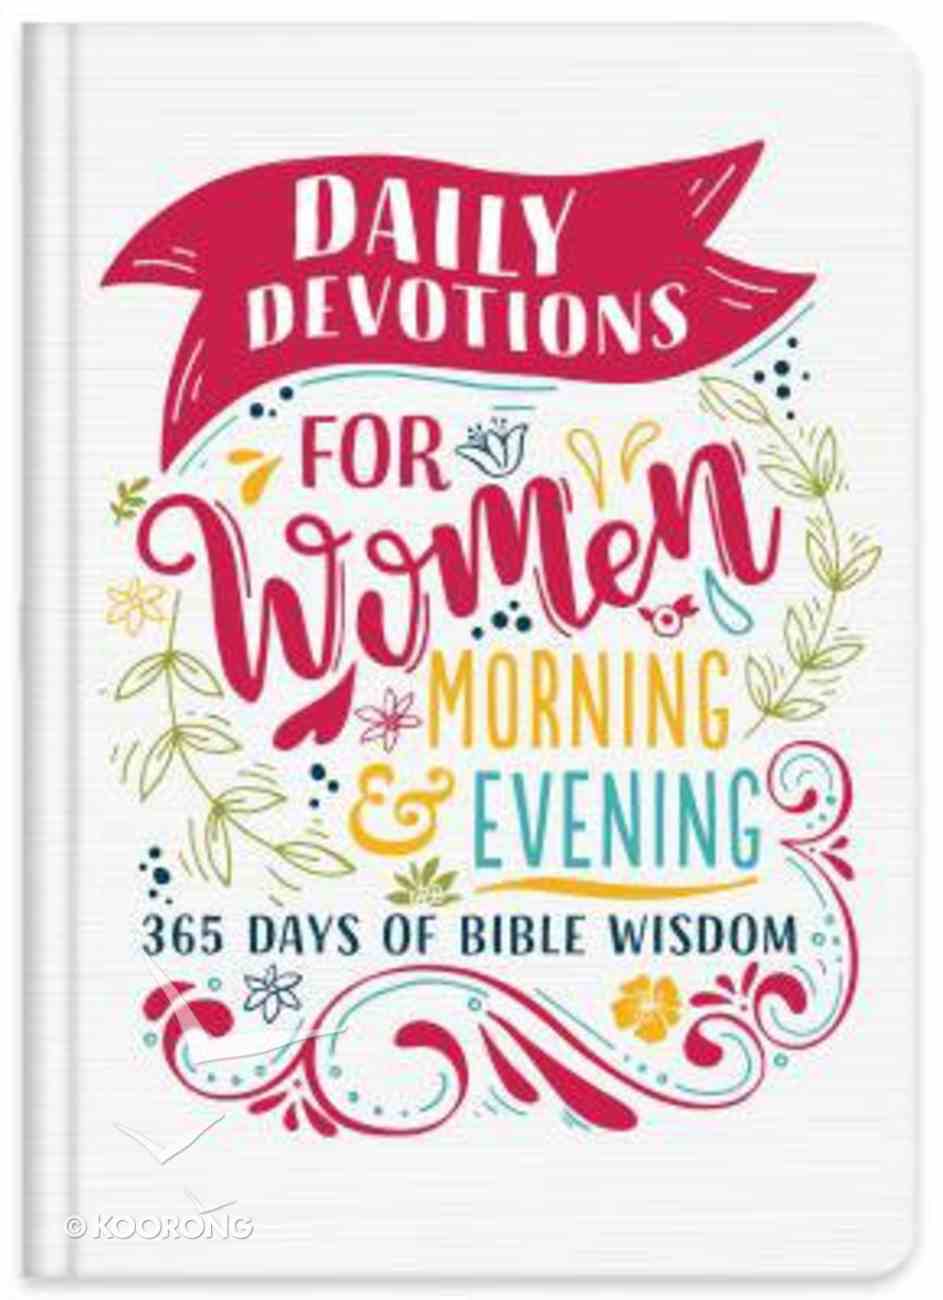 Daily Devotions For Women Morning & Evening Edition: 365 Days of Bible Wisdom Hardback